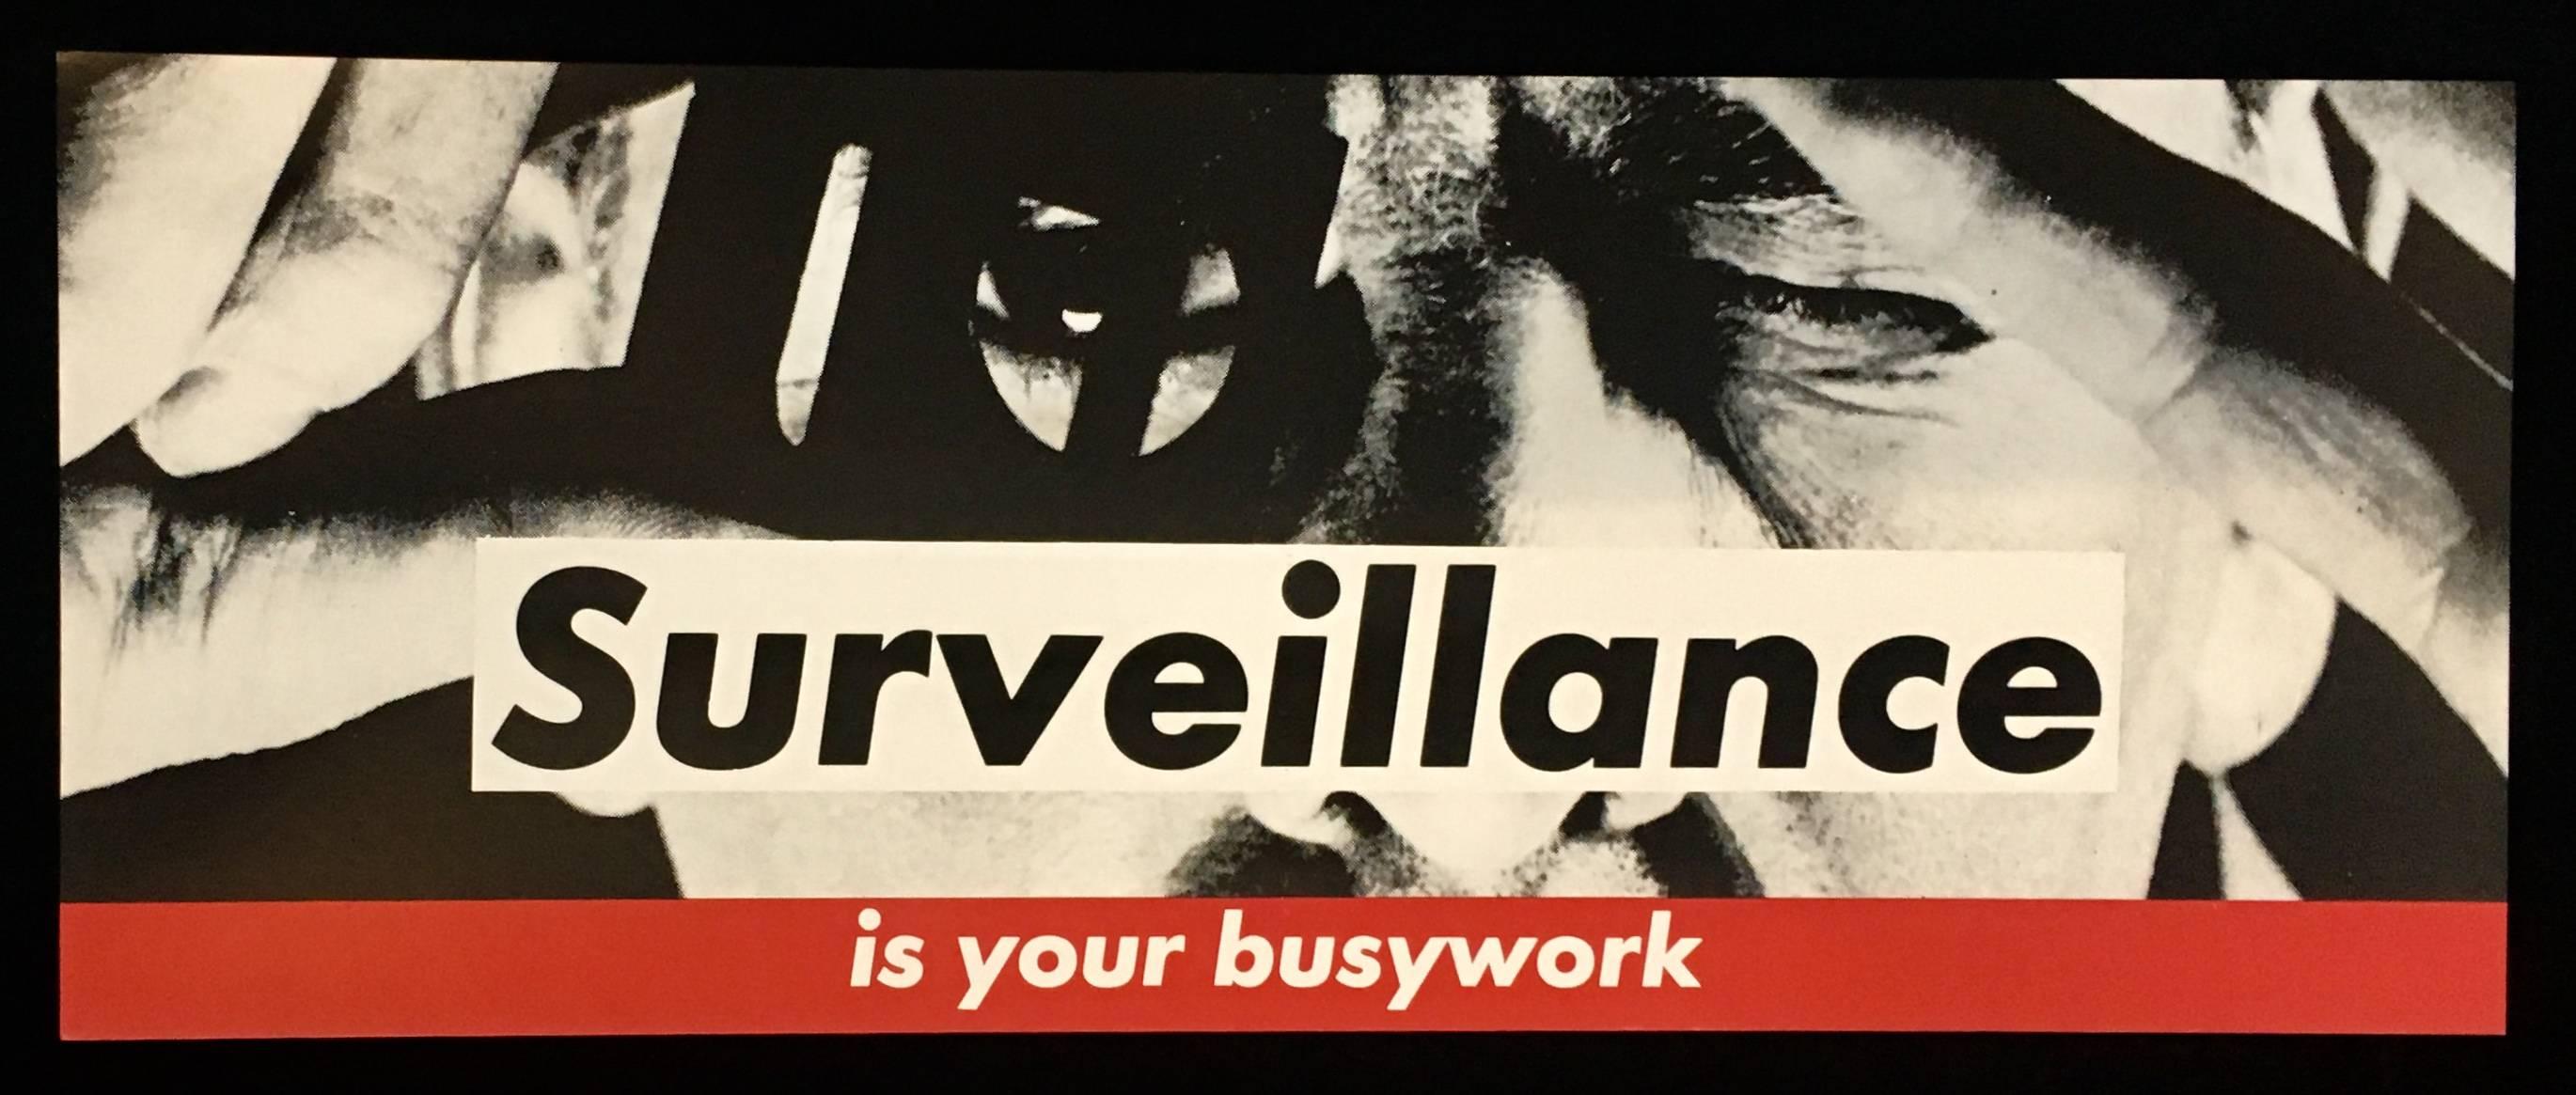 Barbara Kruger Surveillance Is Your Busy Work 1